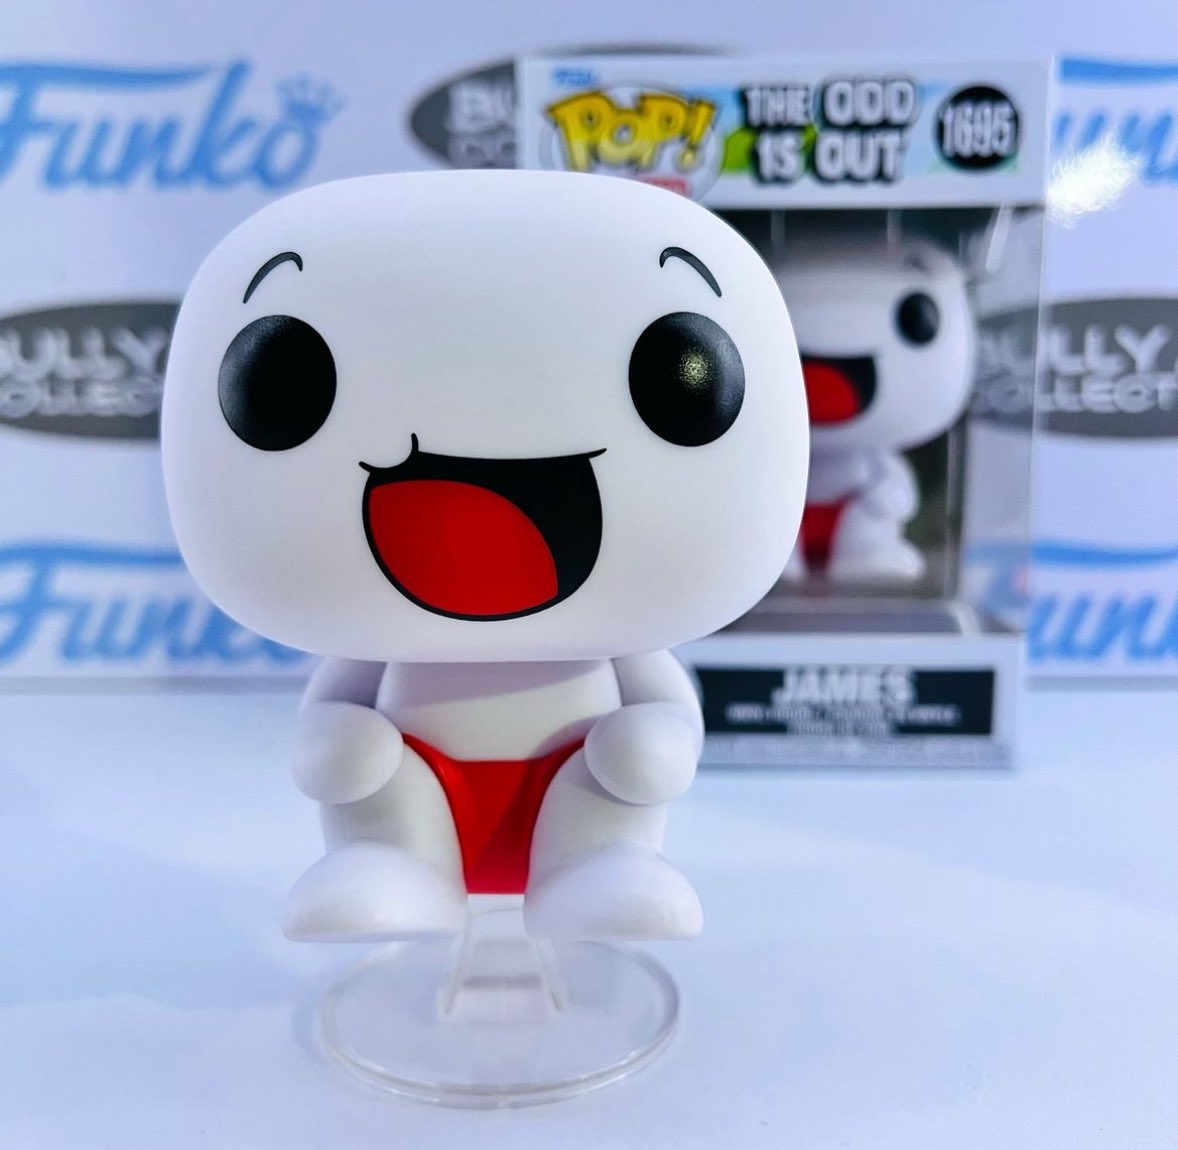 In person and OOB with The Odd 1S Out James Rallison Funko POP! Grab it below! Thanks @bullyboycollectibles ~
Linky ~ ee.toys/JCRYRB
#Ad #TheOdd1SOut #JamesRallison #FPN #FunkoPOPNews #Funko #POP #POPVinyl #FunkoPOP #FunkoSoda